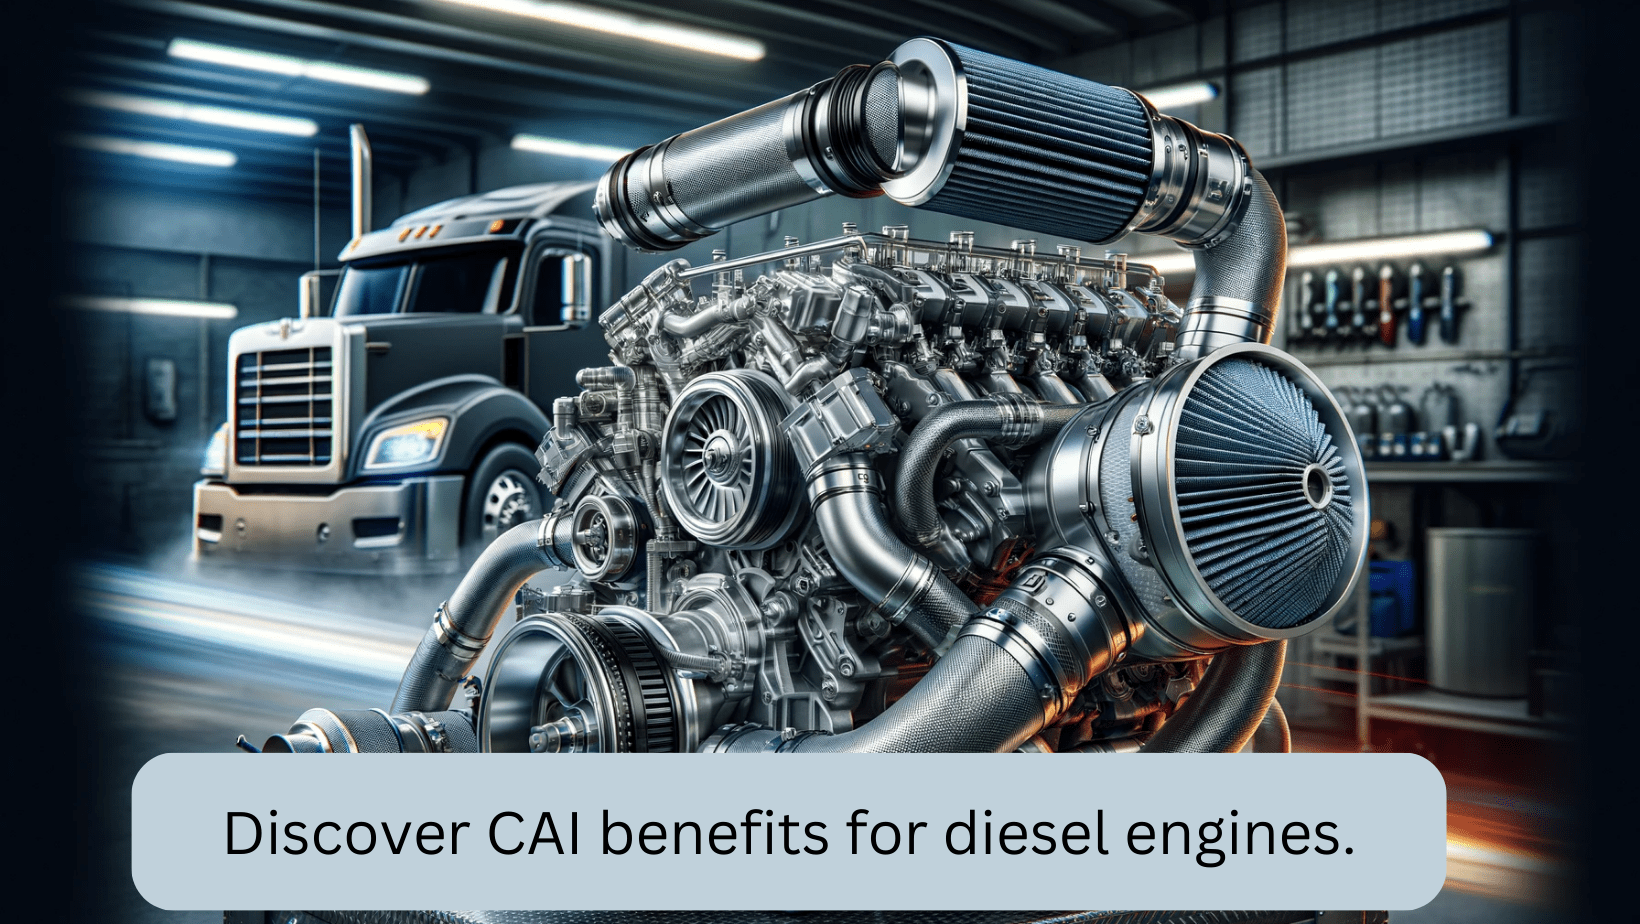 Benefits for diesel engines, what are they?